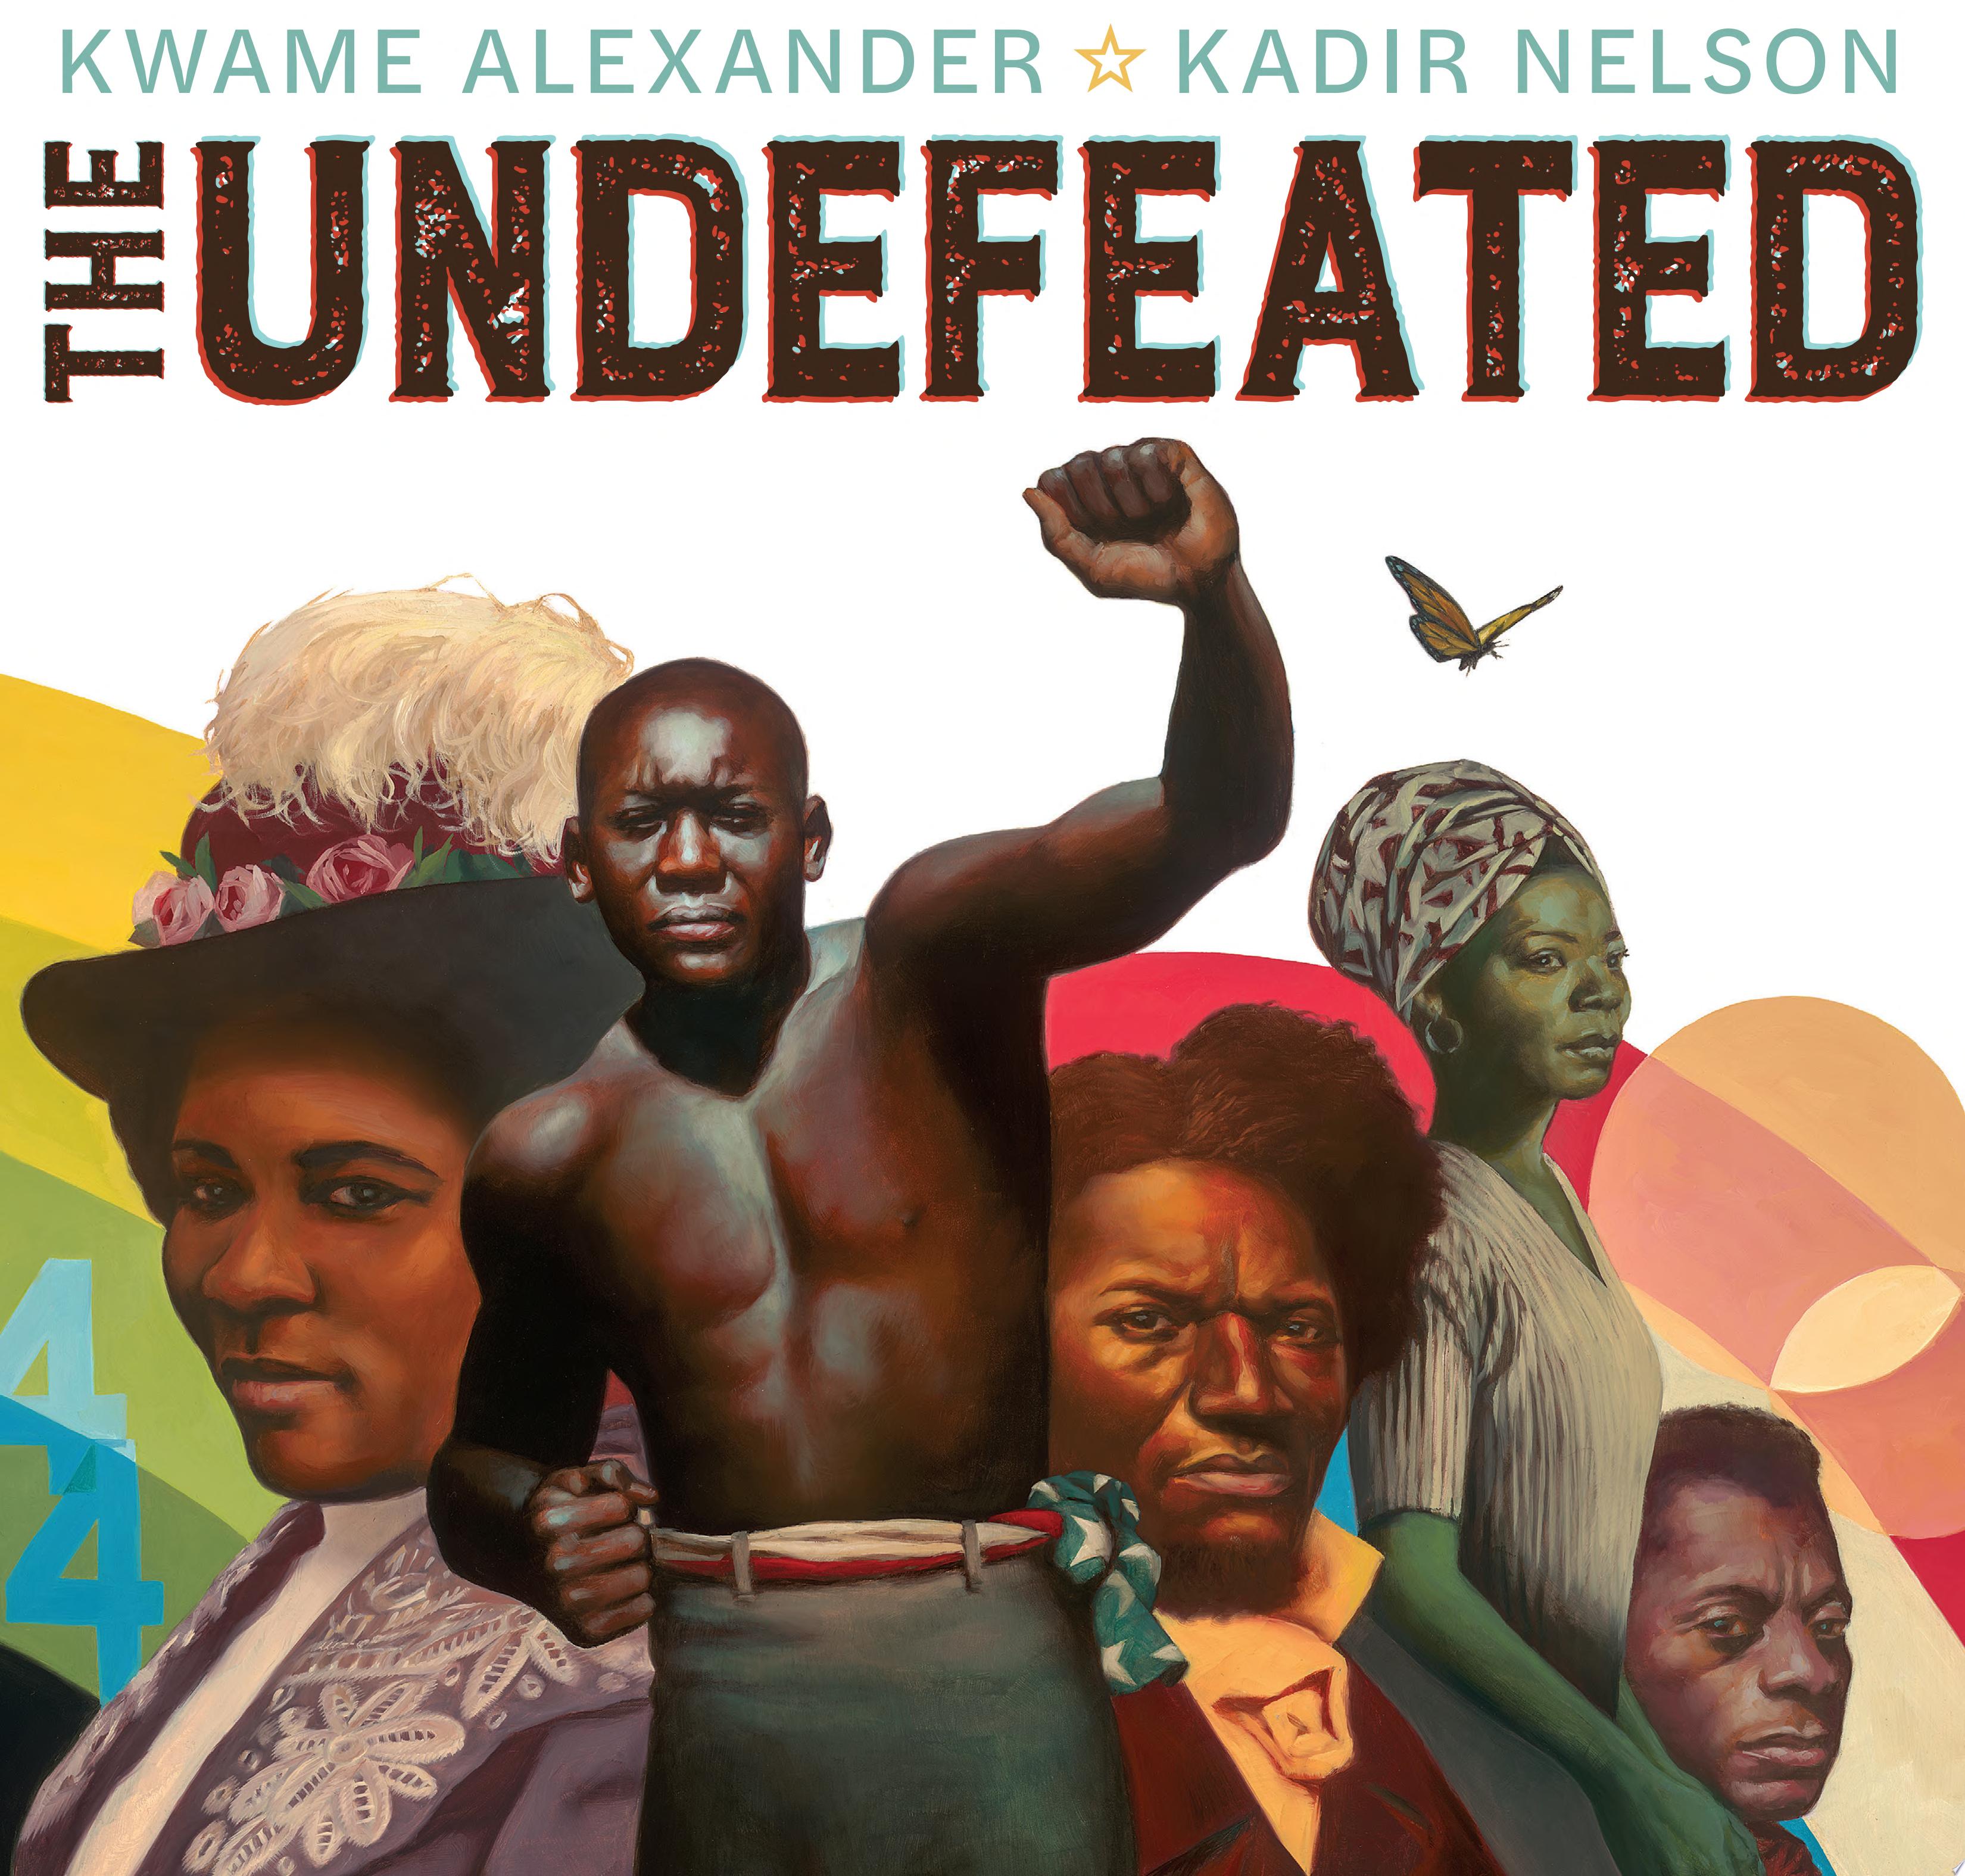 Image for "The Undefeated"